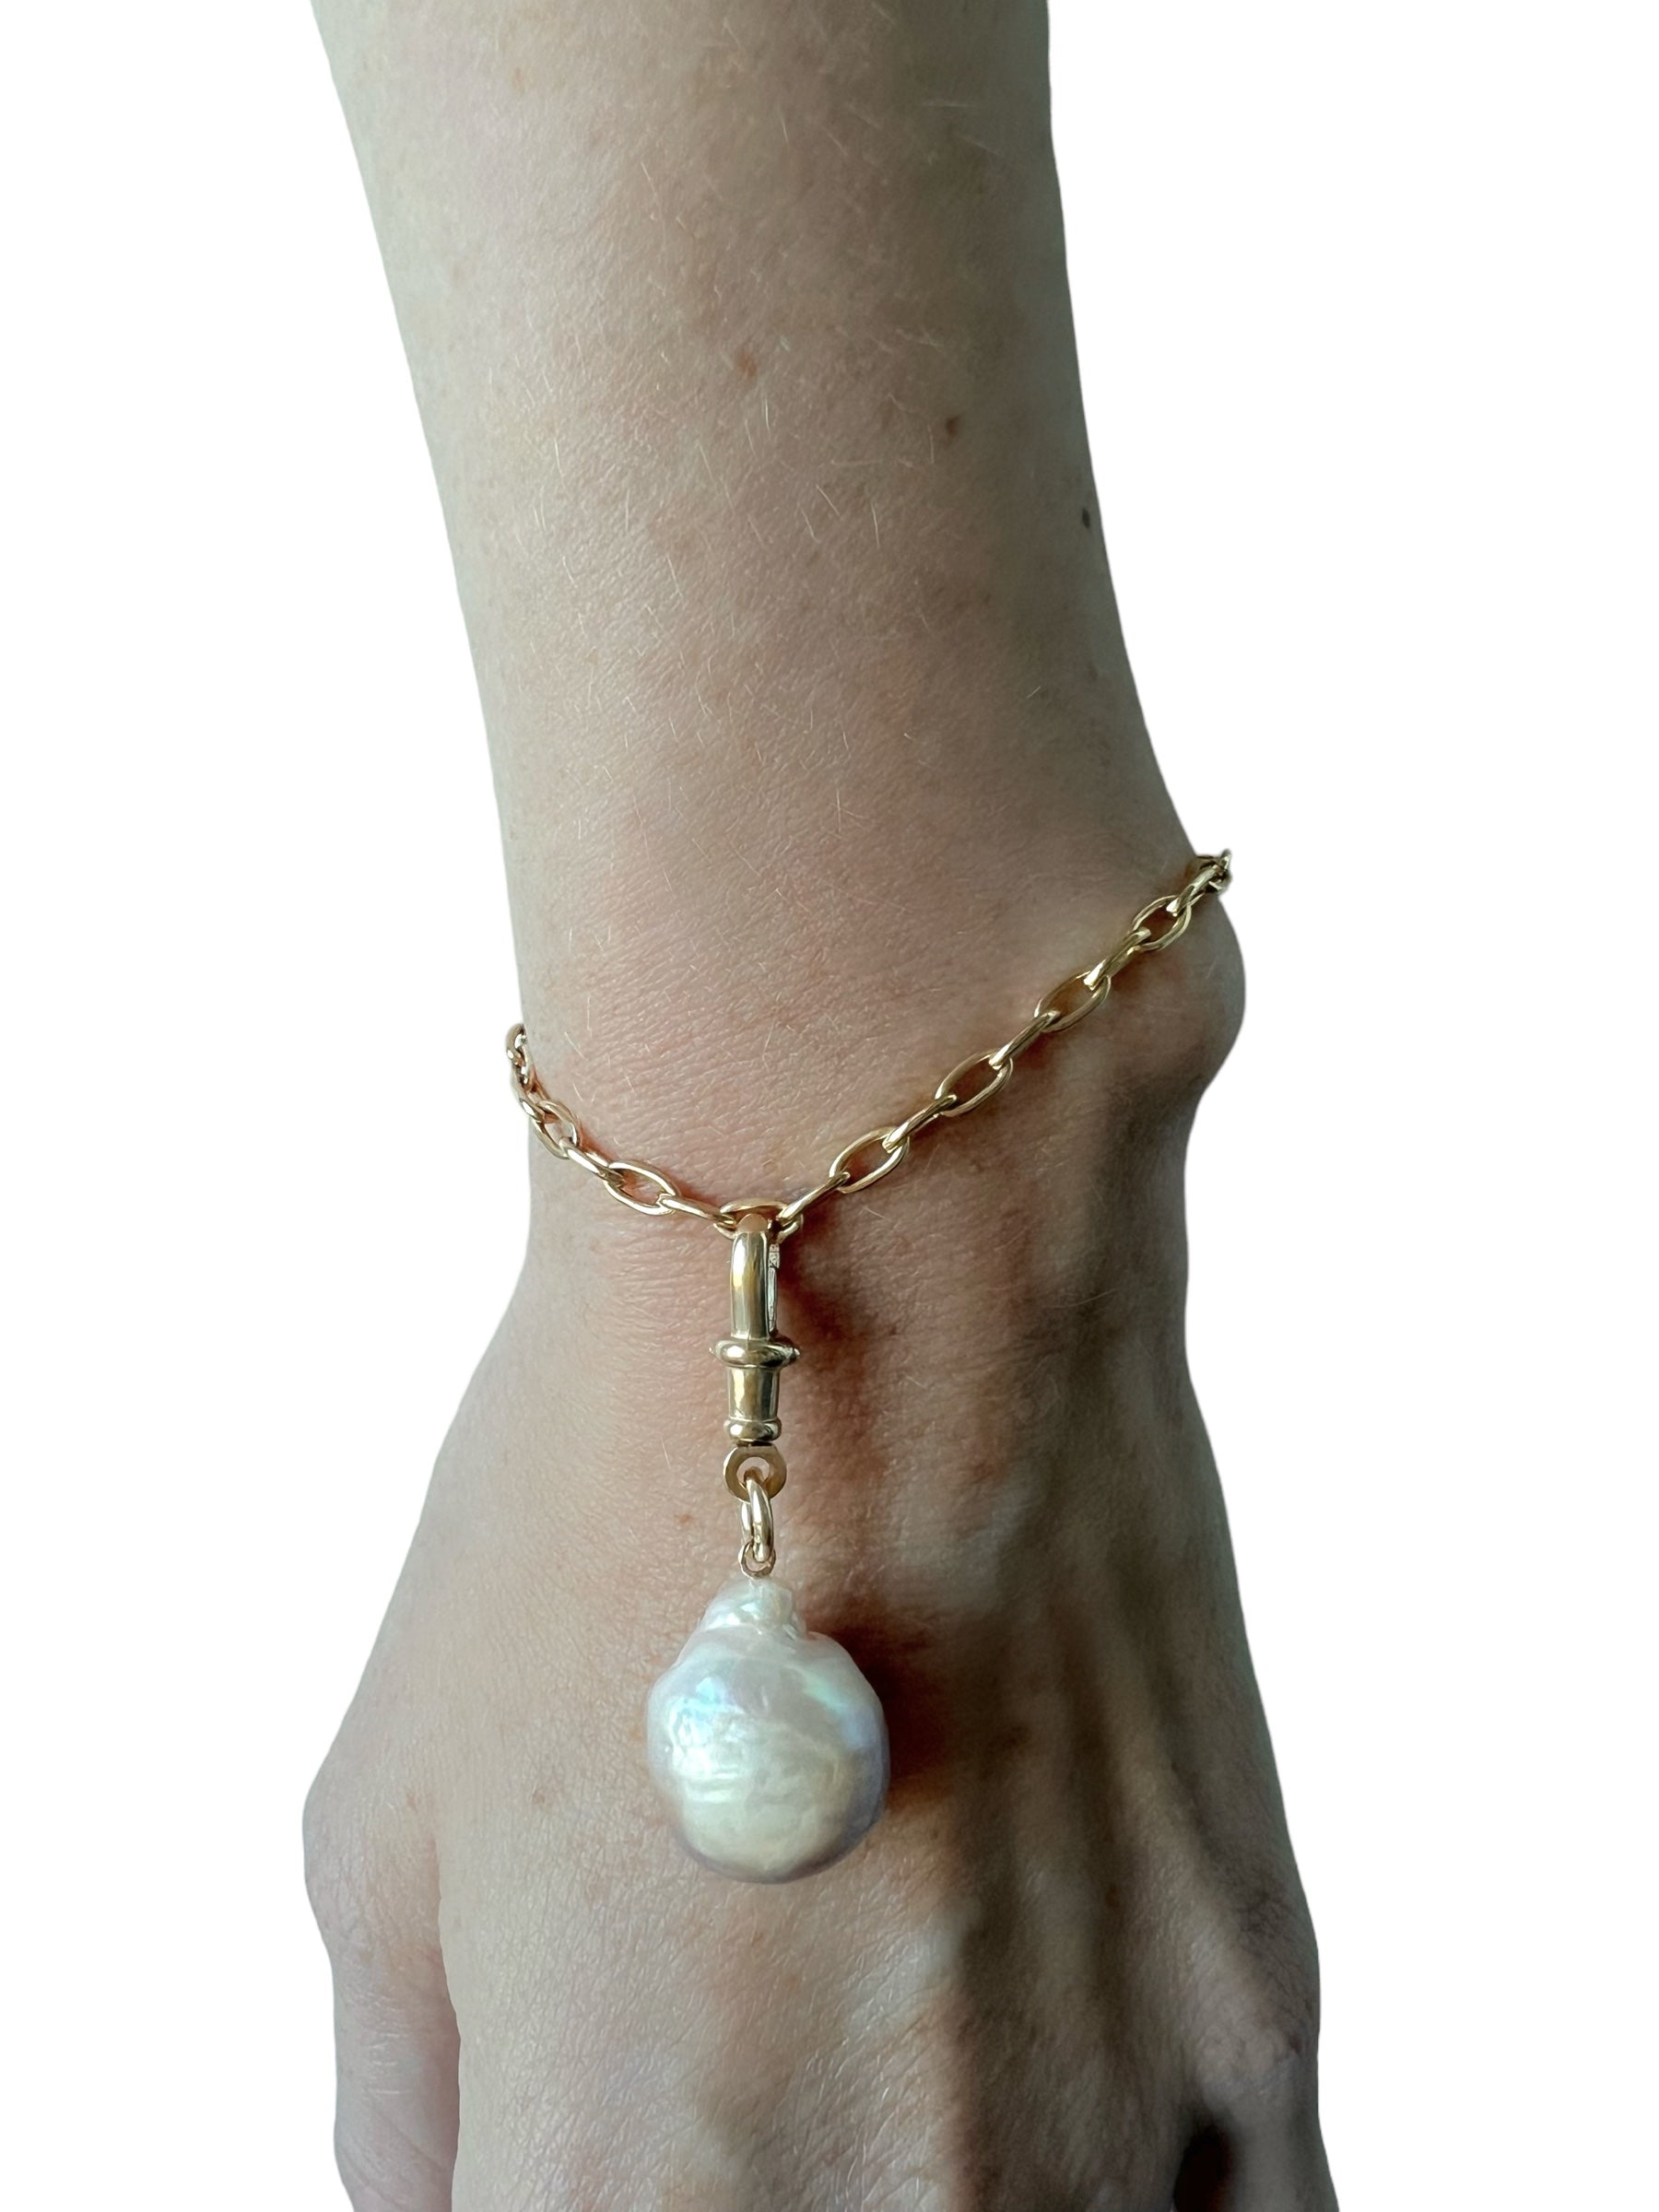 The Pearl Charm